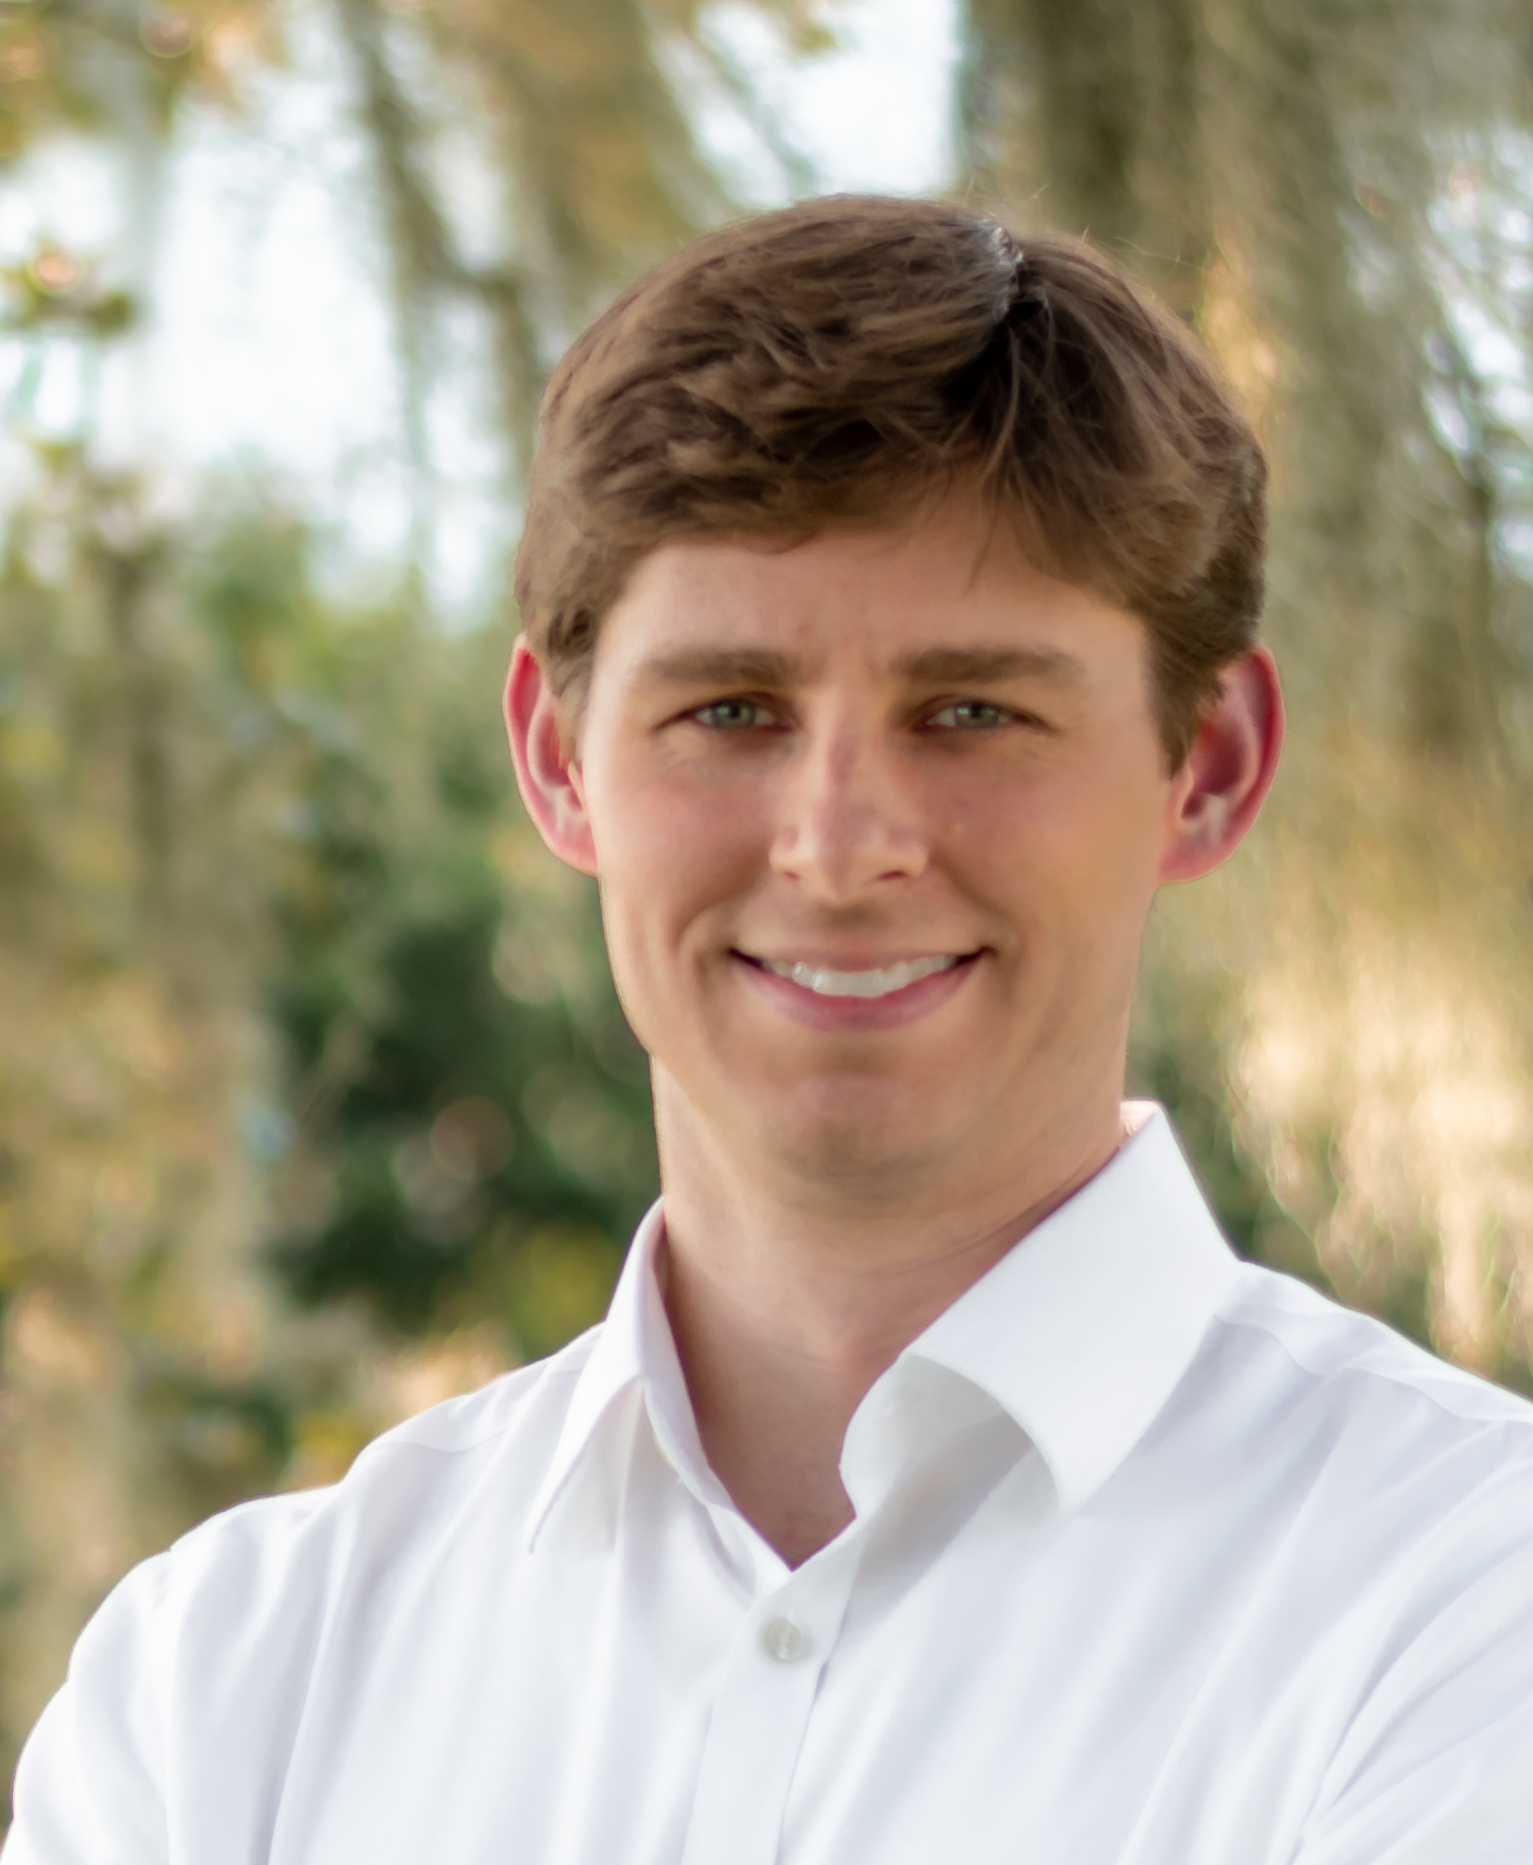 Nelson Qualifies for District 89 House Seat